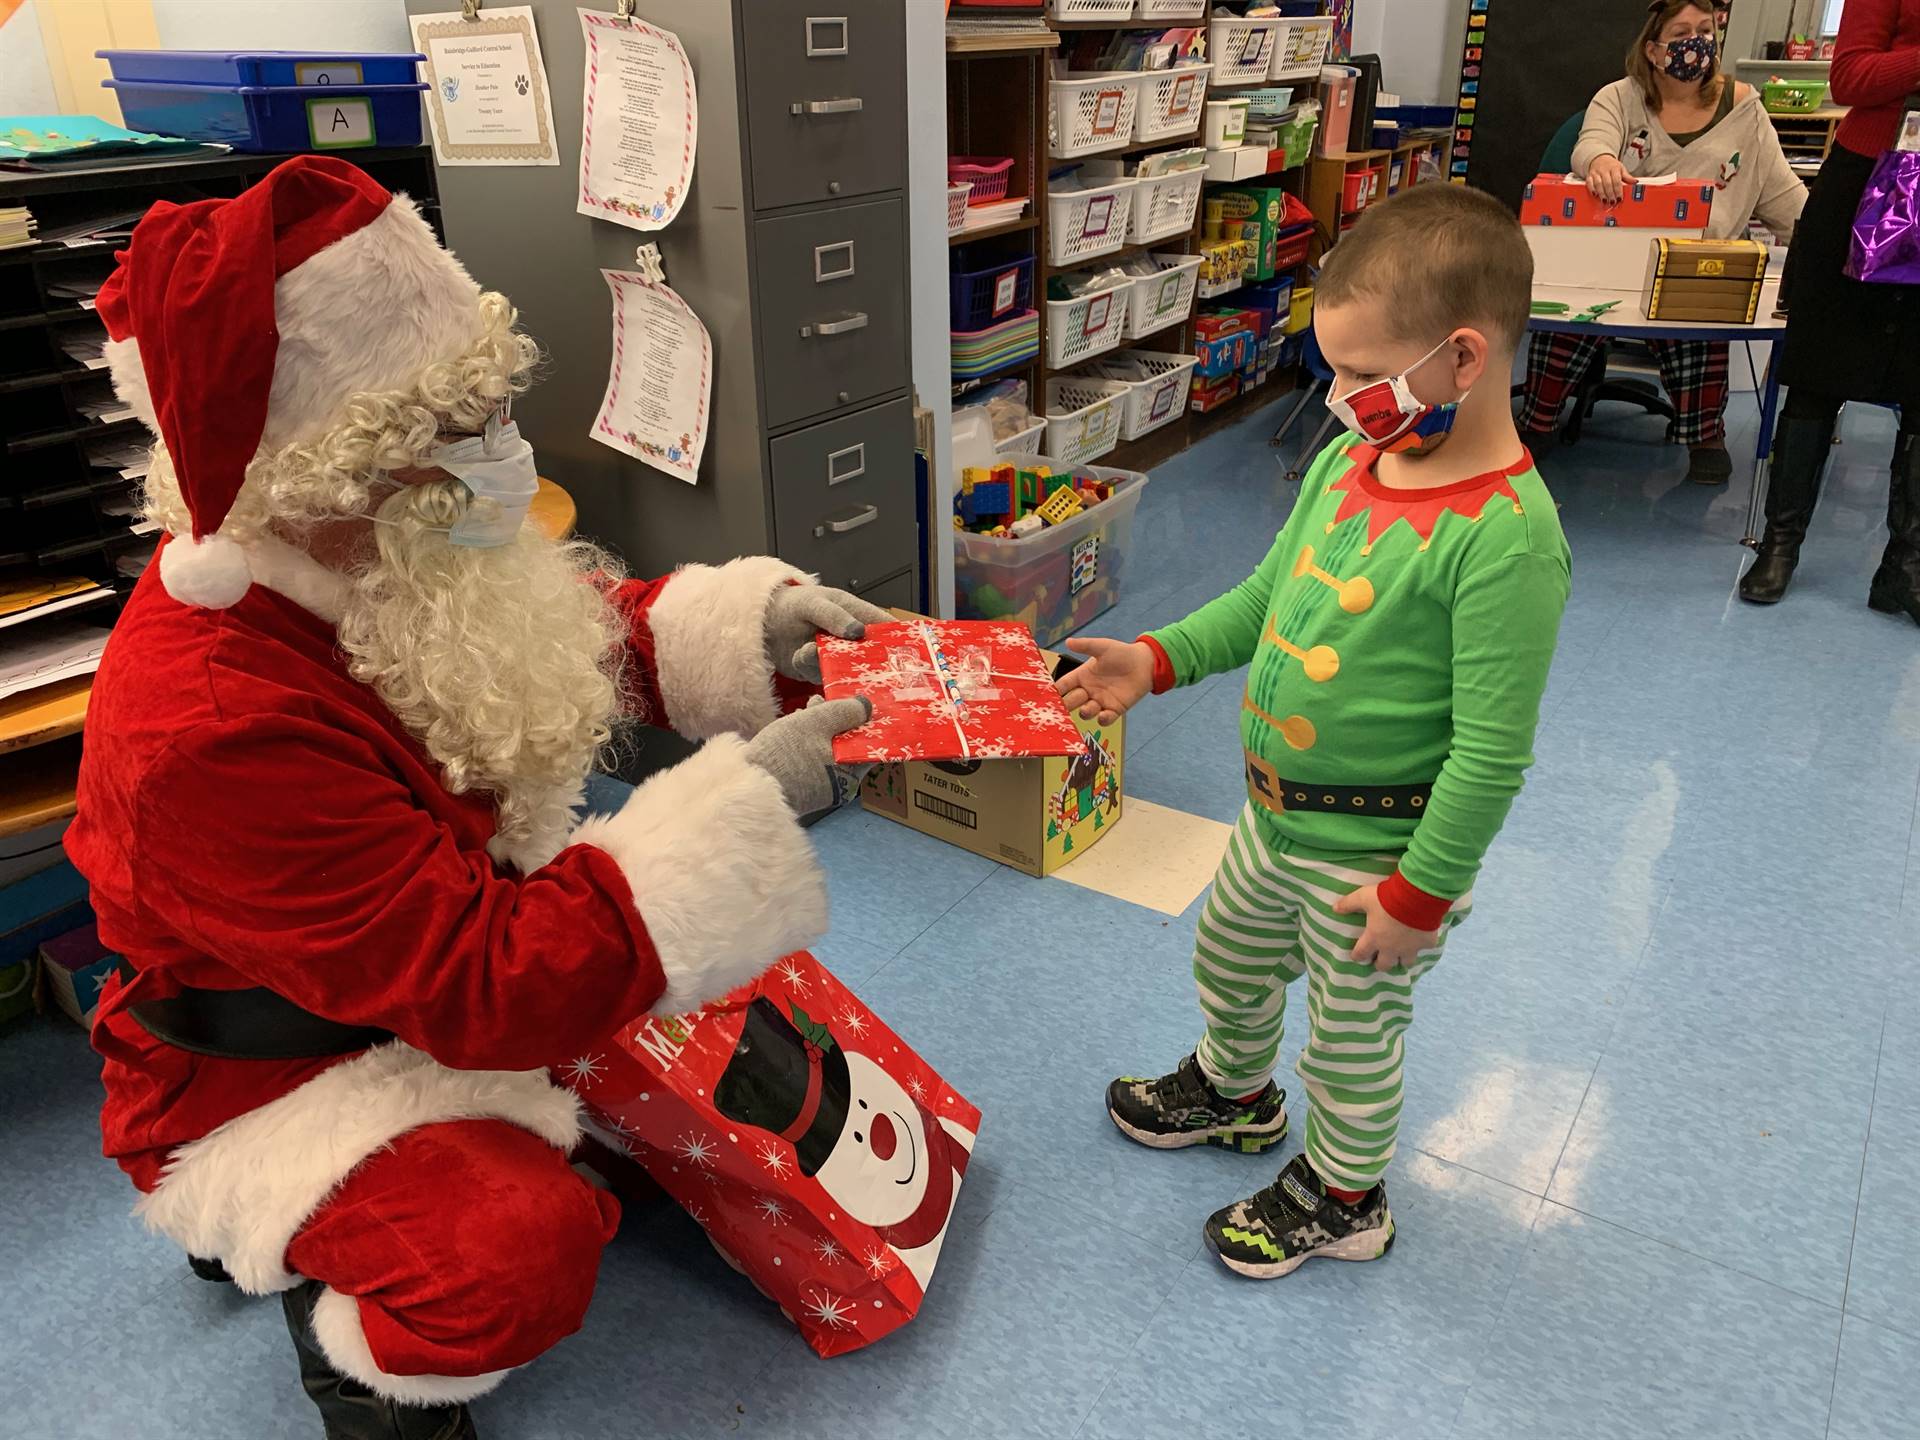 Santa hands a gift out to a child dressed like buddy the elf!